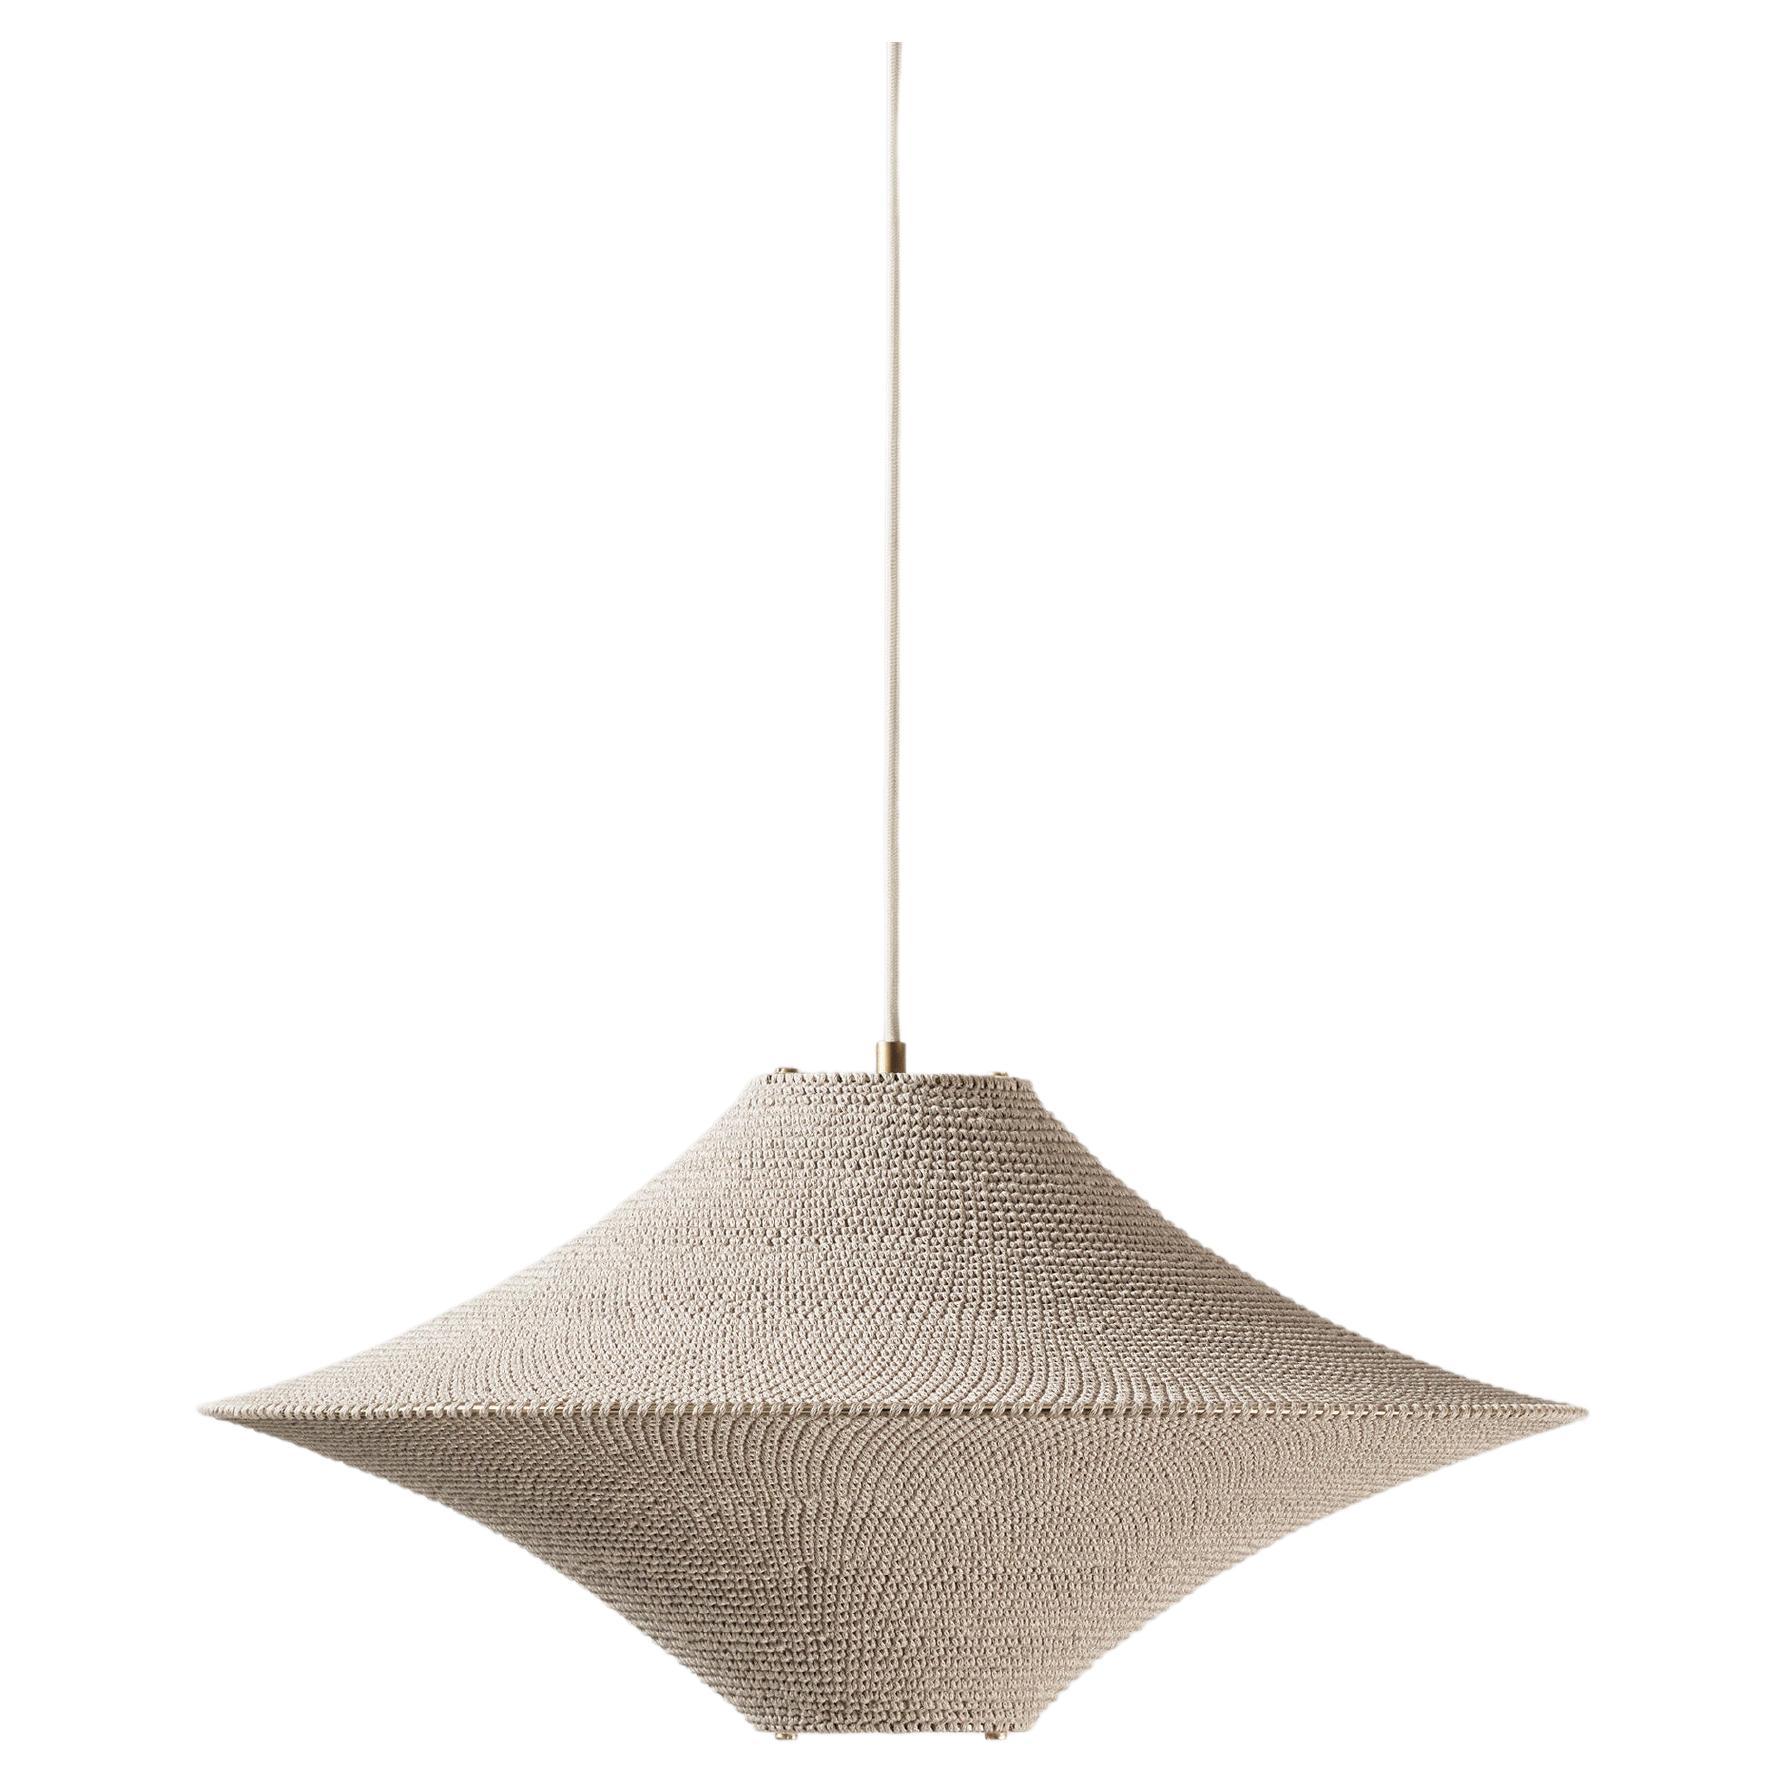 SOLITAIRE 01 Pendant Light Ø100cm/39.4in, Hand Crocheted in Egyptian Cotton For Sale